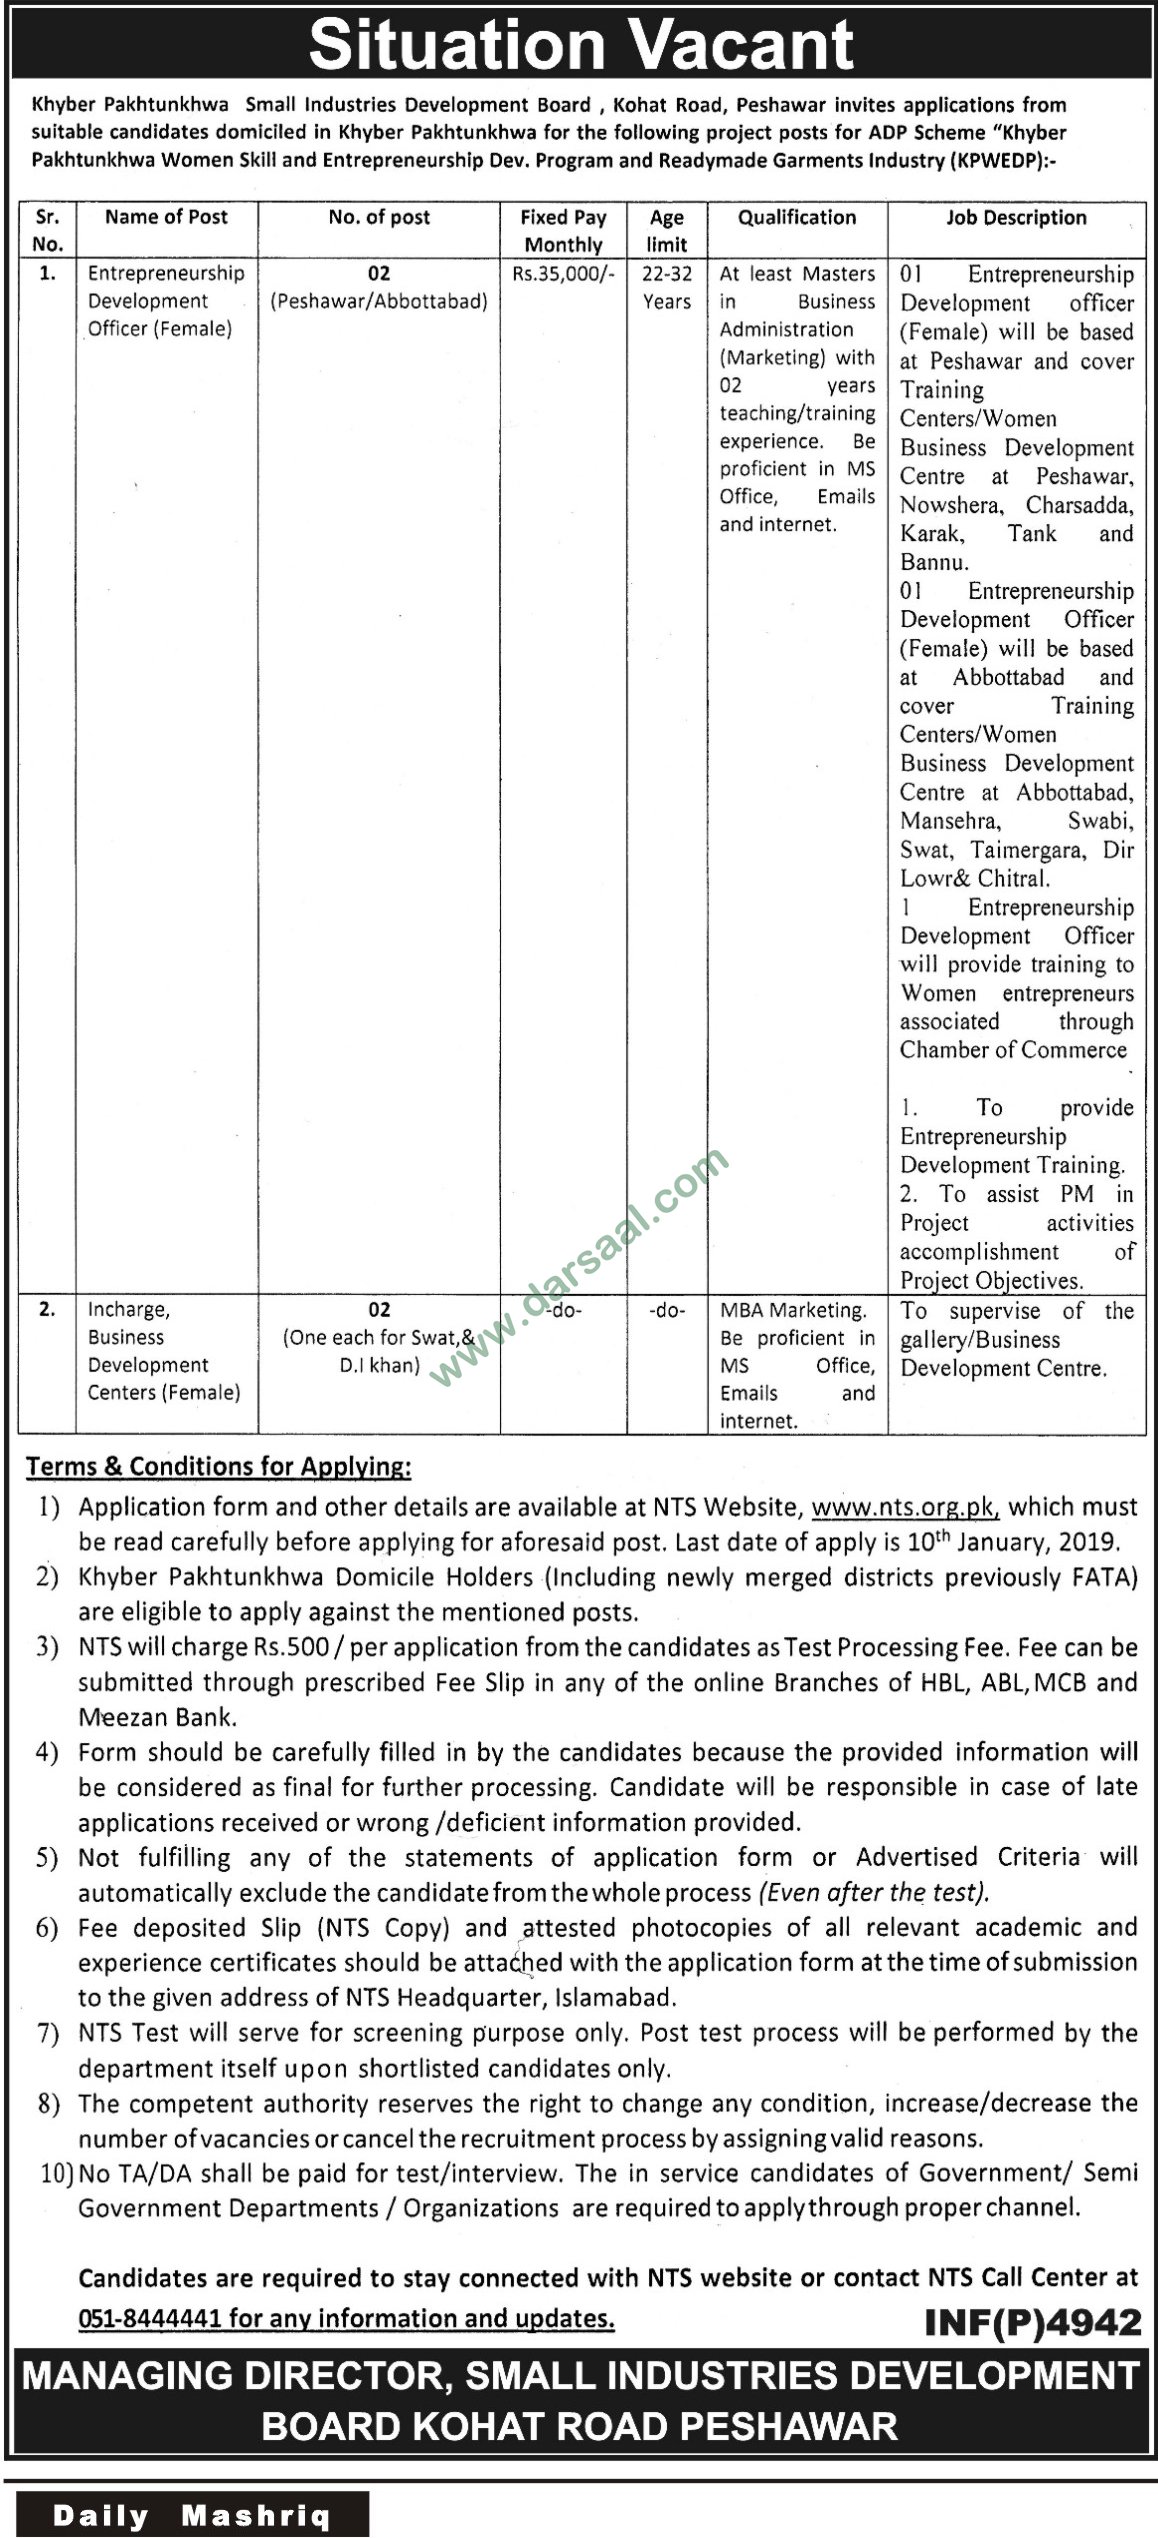 Business Incharge Jobs in Small Industries Development Board in Abbottabad - Dec 27, 2018